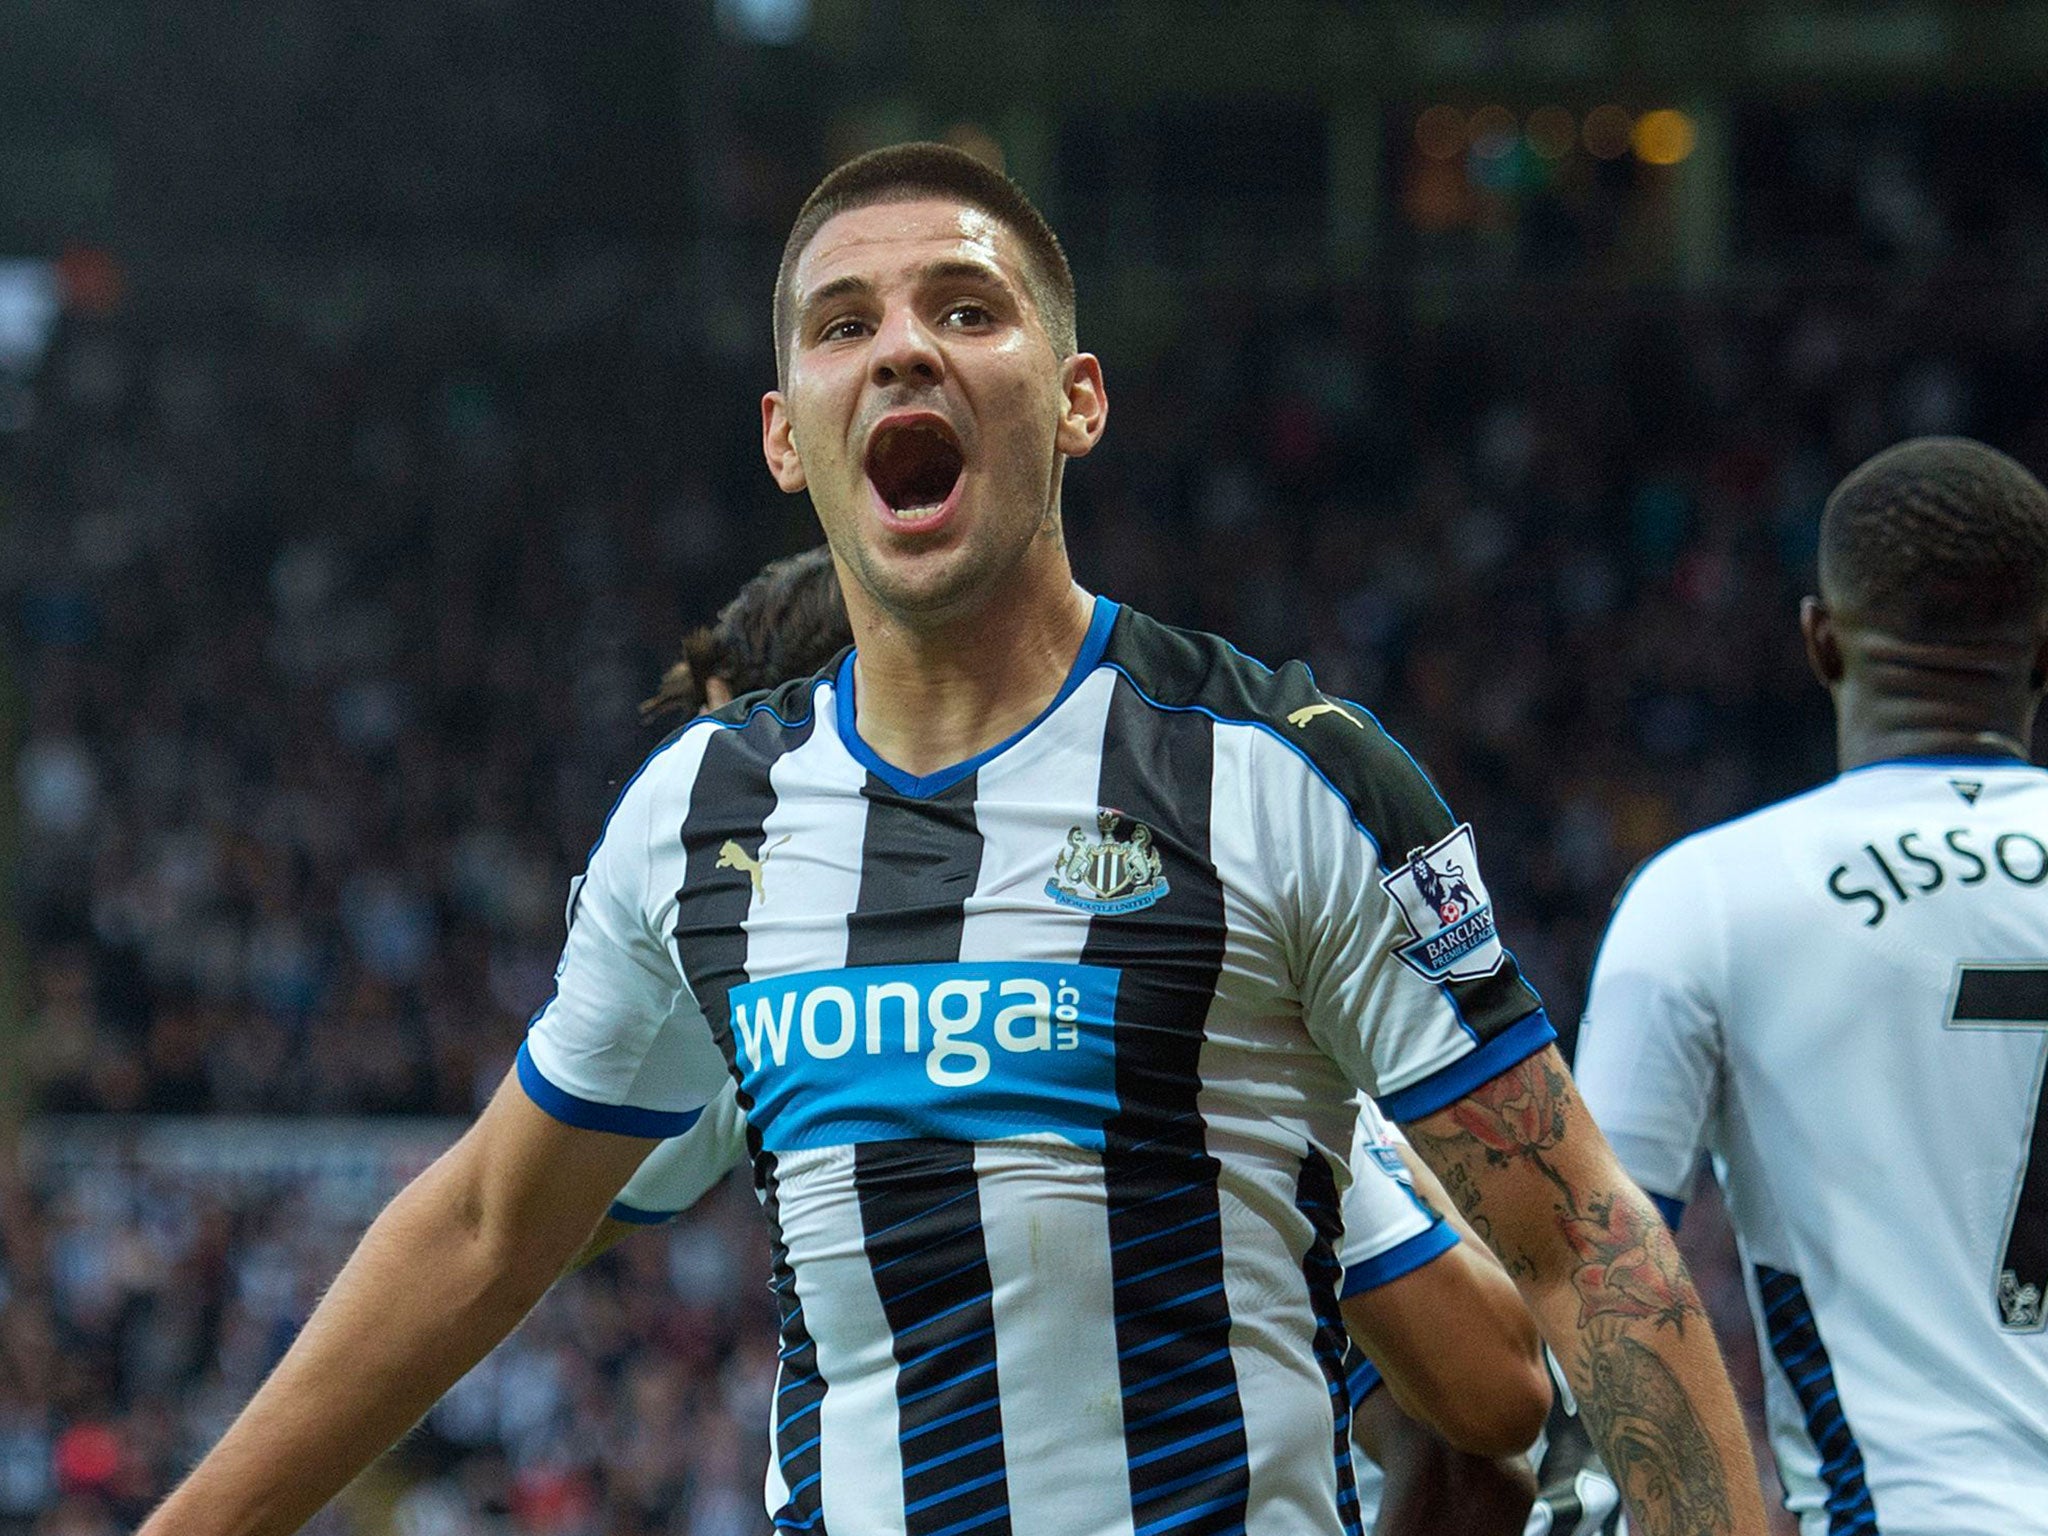 Newcastle striker Aleksandar Mitrovic celebrates one of his side’s goals in the 2-2 draw with Chelsea